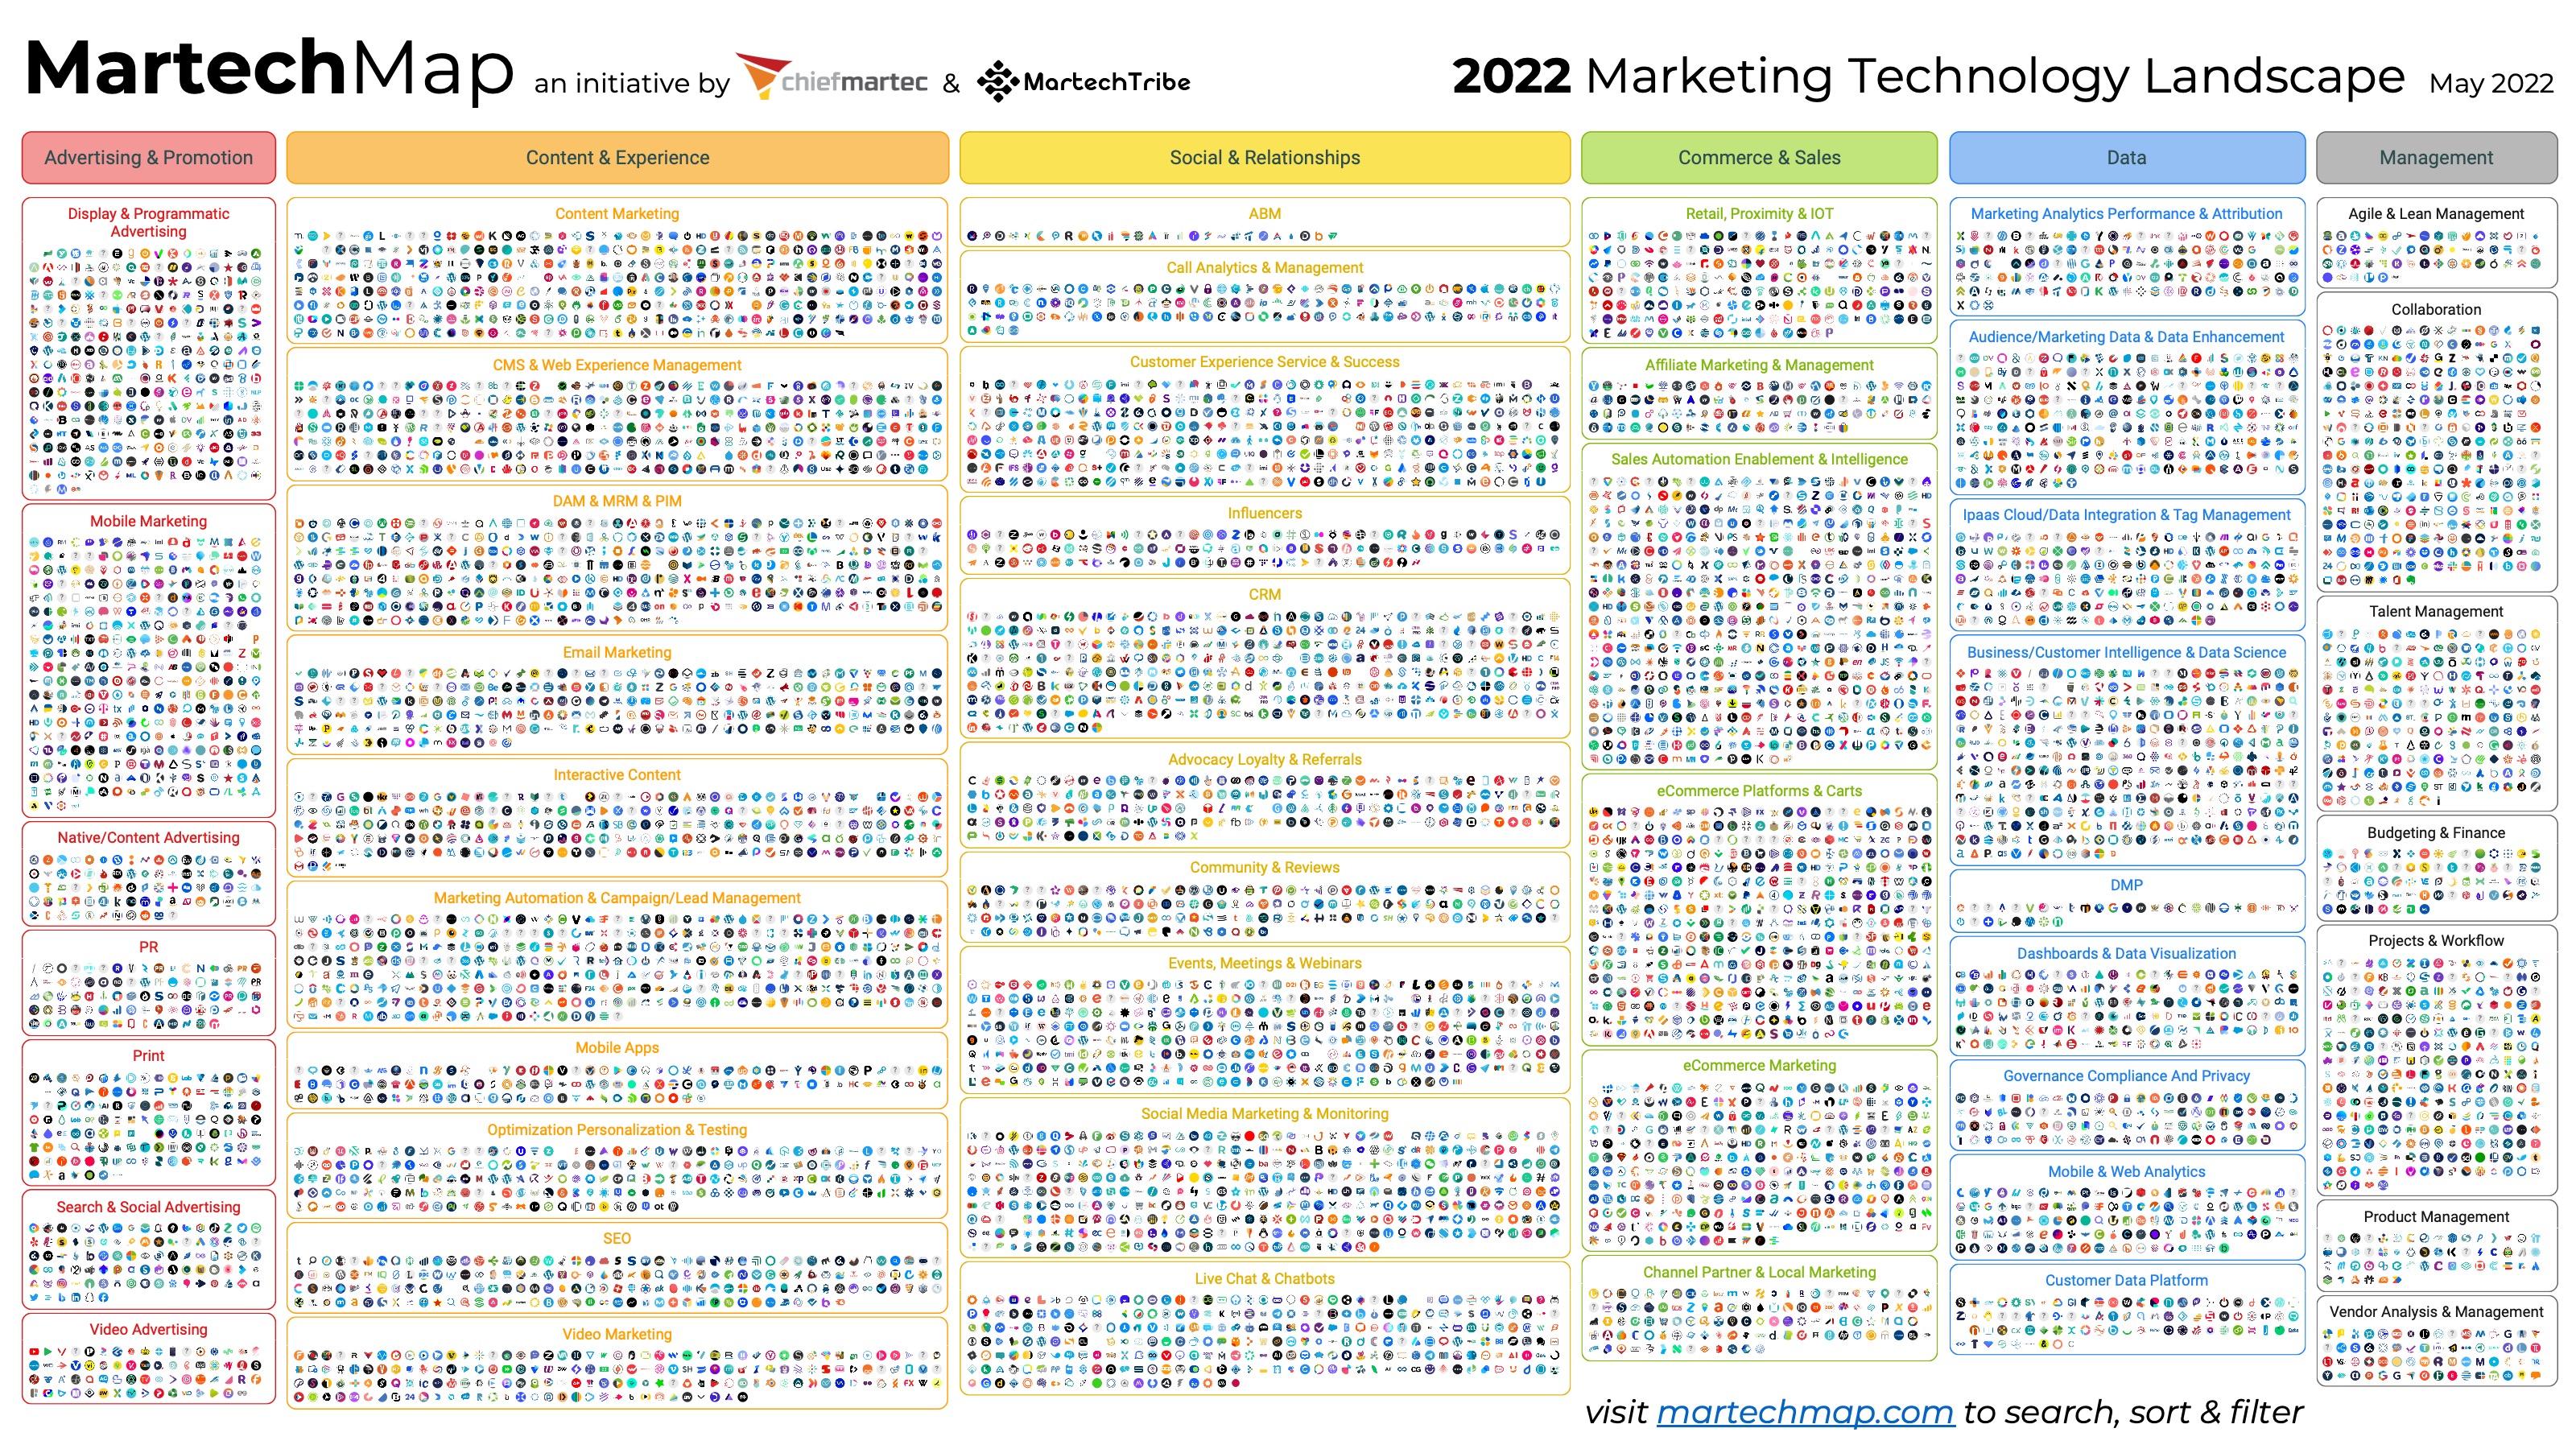 3200px x 1800px - Marketing Technology Landscape 2022: search 9,932 solutions on martechmap. com - Chief Marketing Technologist